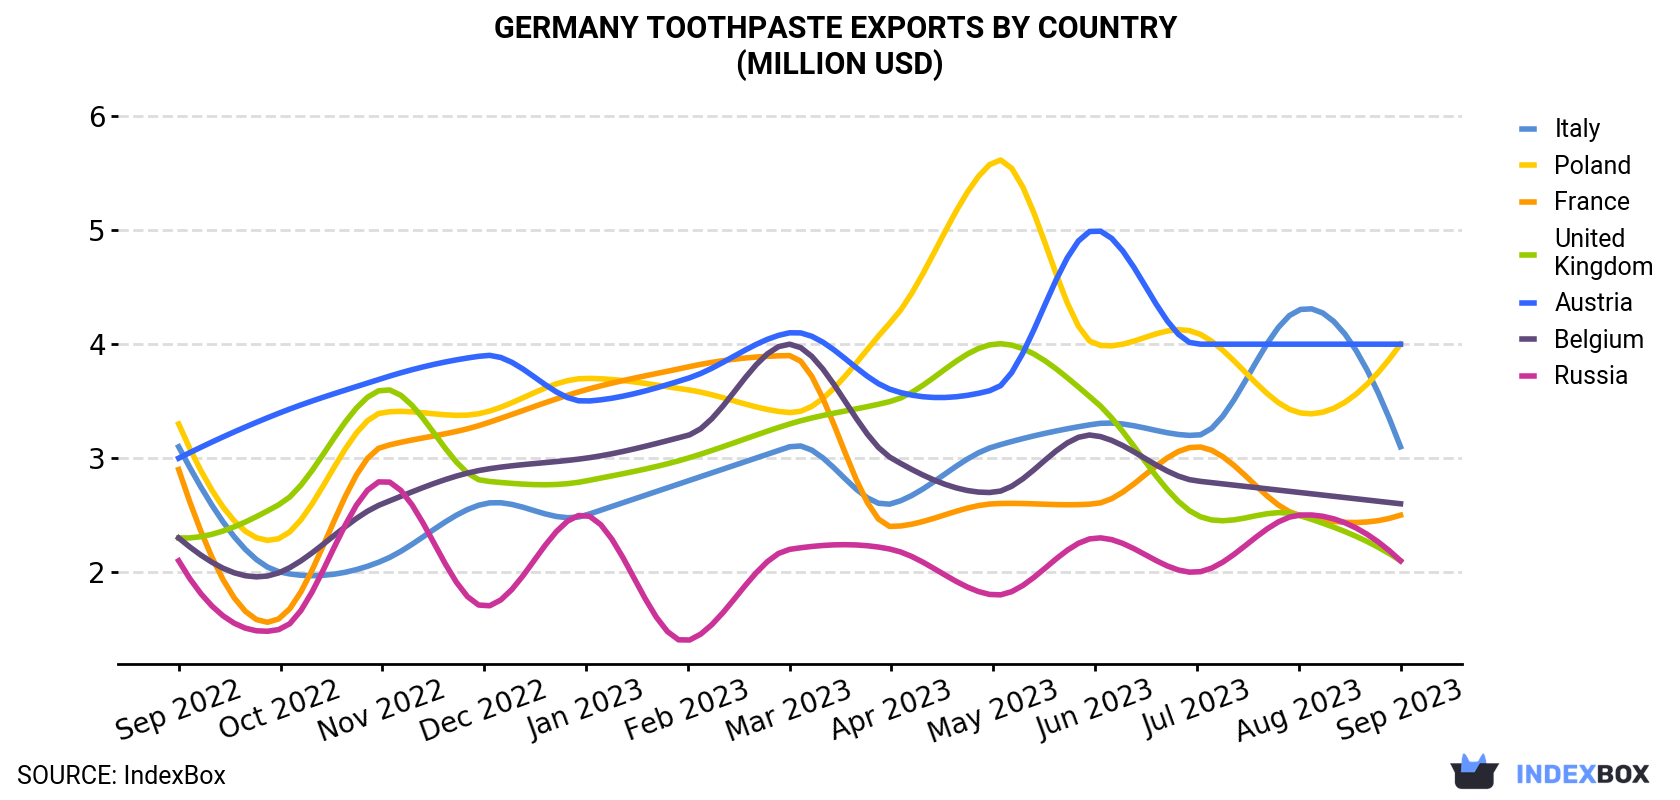 Germany Toothpaste Exports By Country (Million USD)